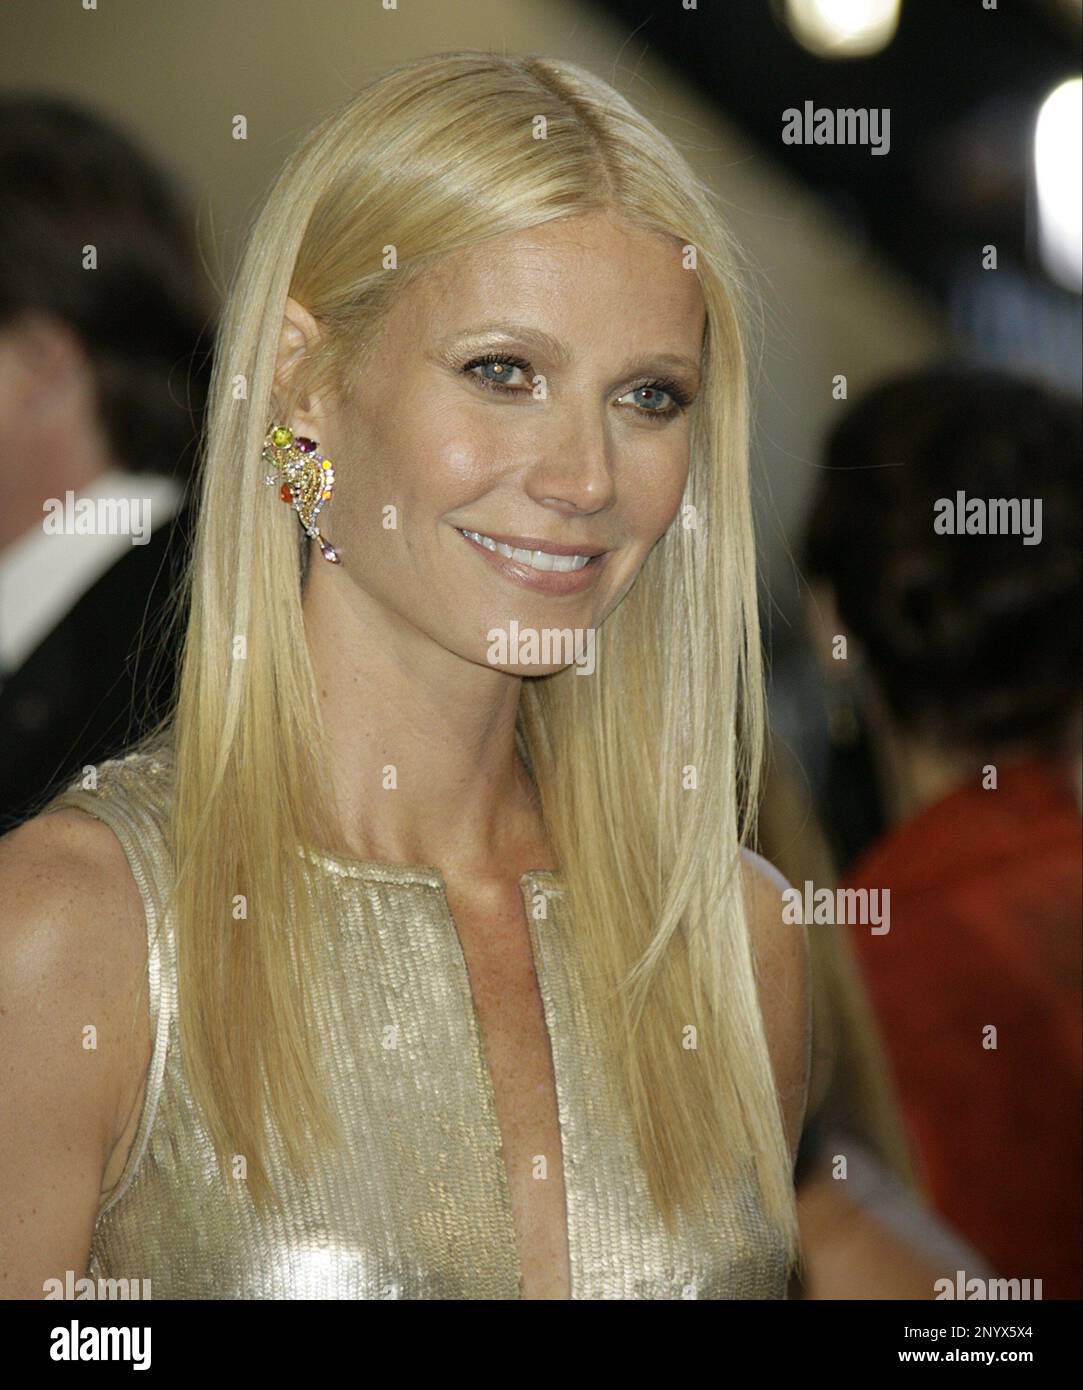 Actress Gwyneth Paltrow arrives at the 83rd Annual Academy Awards held at the Kodak Theatre on February 27, 2011 in Los Angeles, California. Photo by Francis Specker Stock Photo